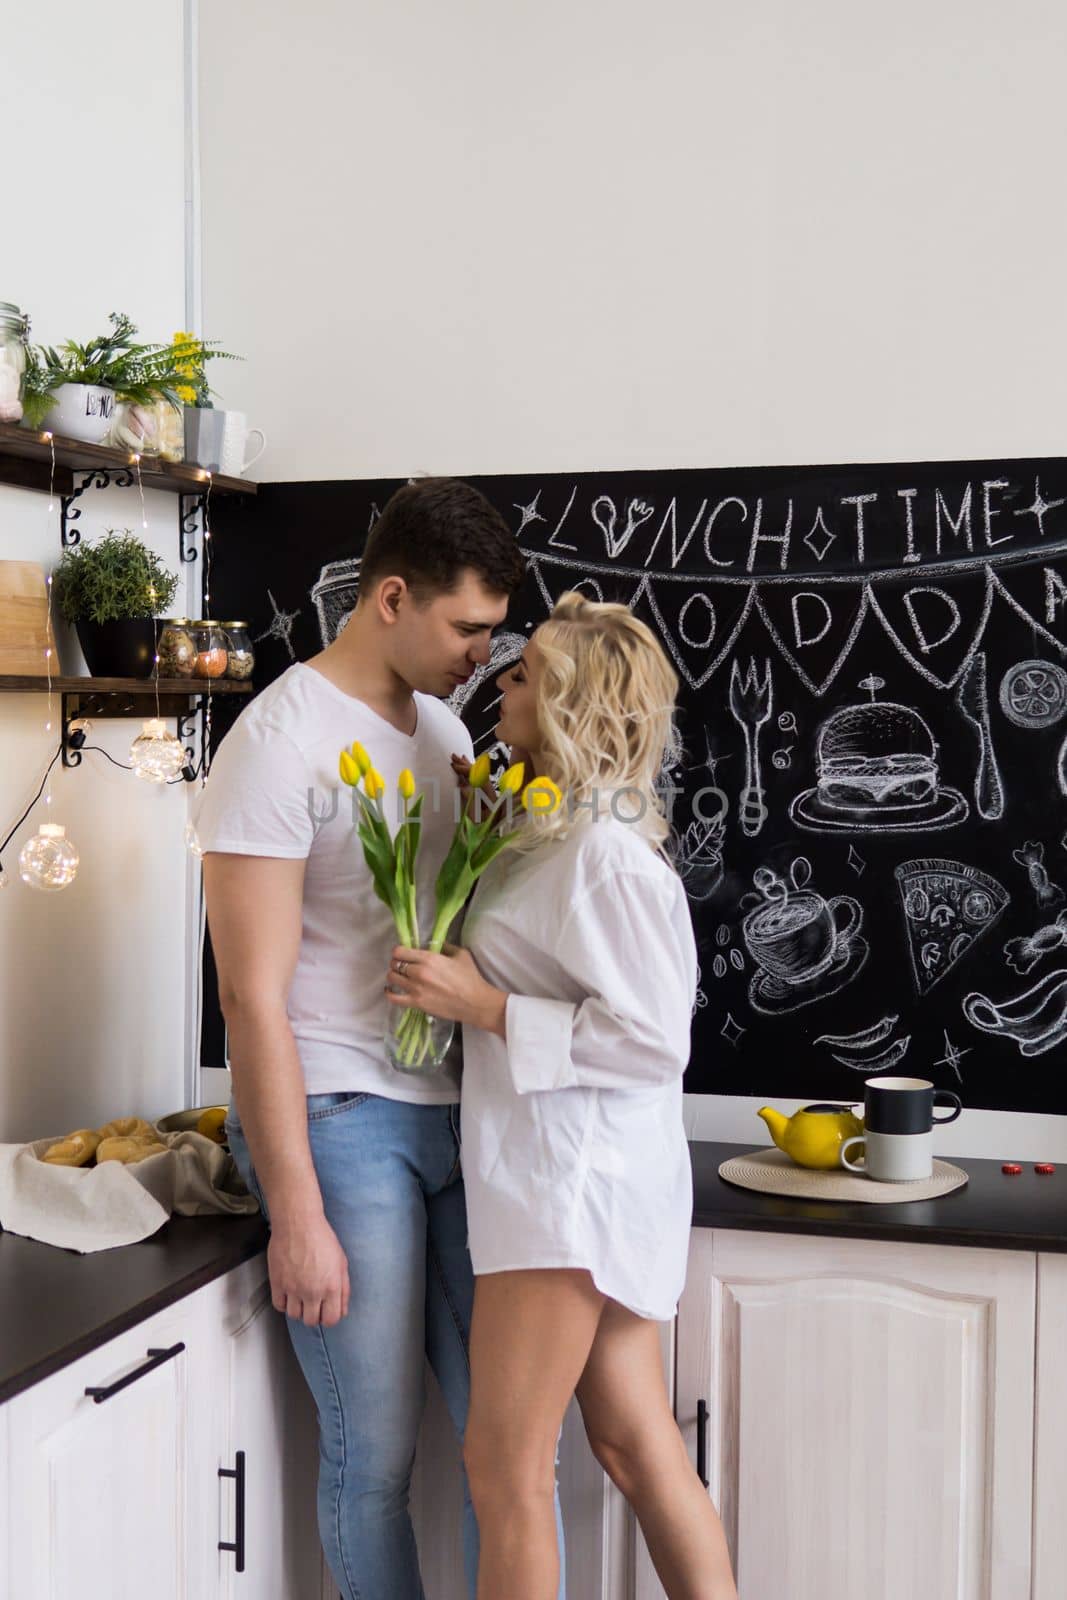 Love is quarantined during the Coronavirus. This is the new normal. A young couple in love in their home kitchen. by Annu1tochka